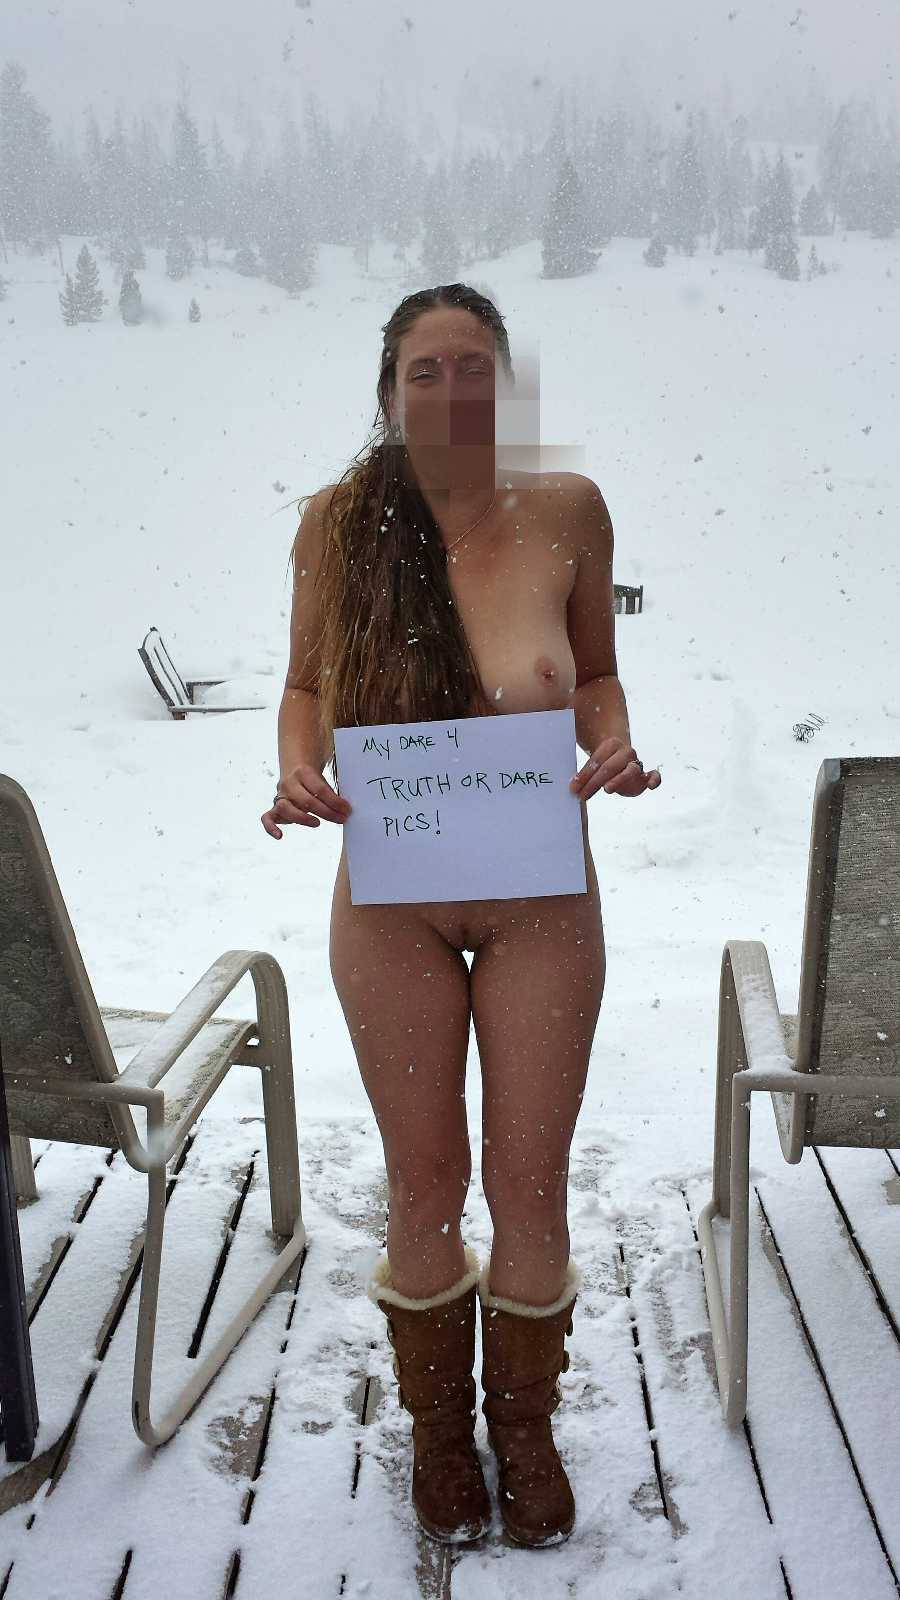 In snow nudes the Public Nudity